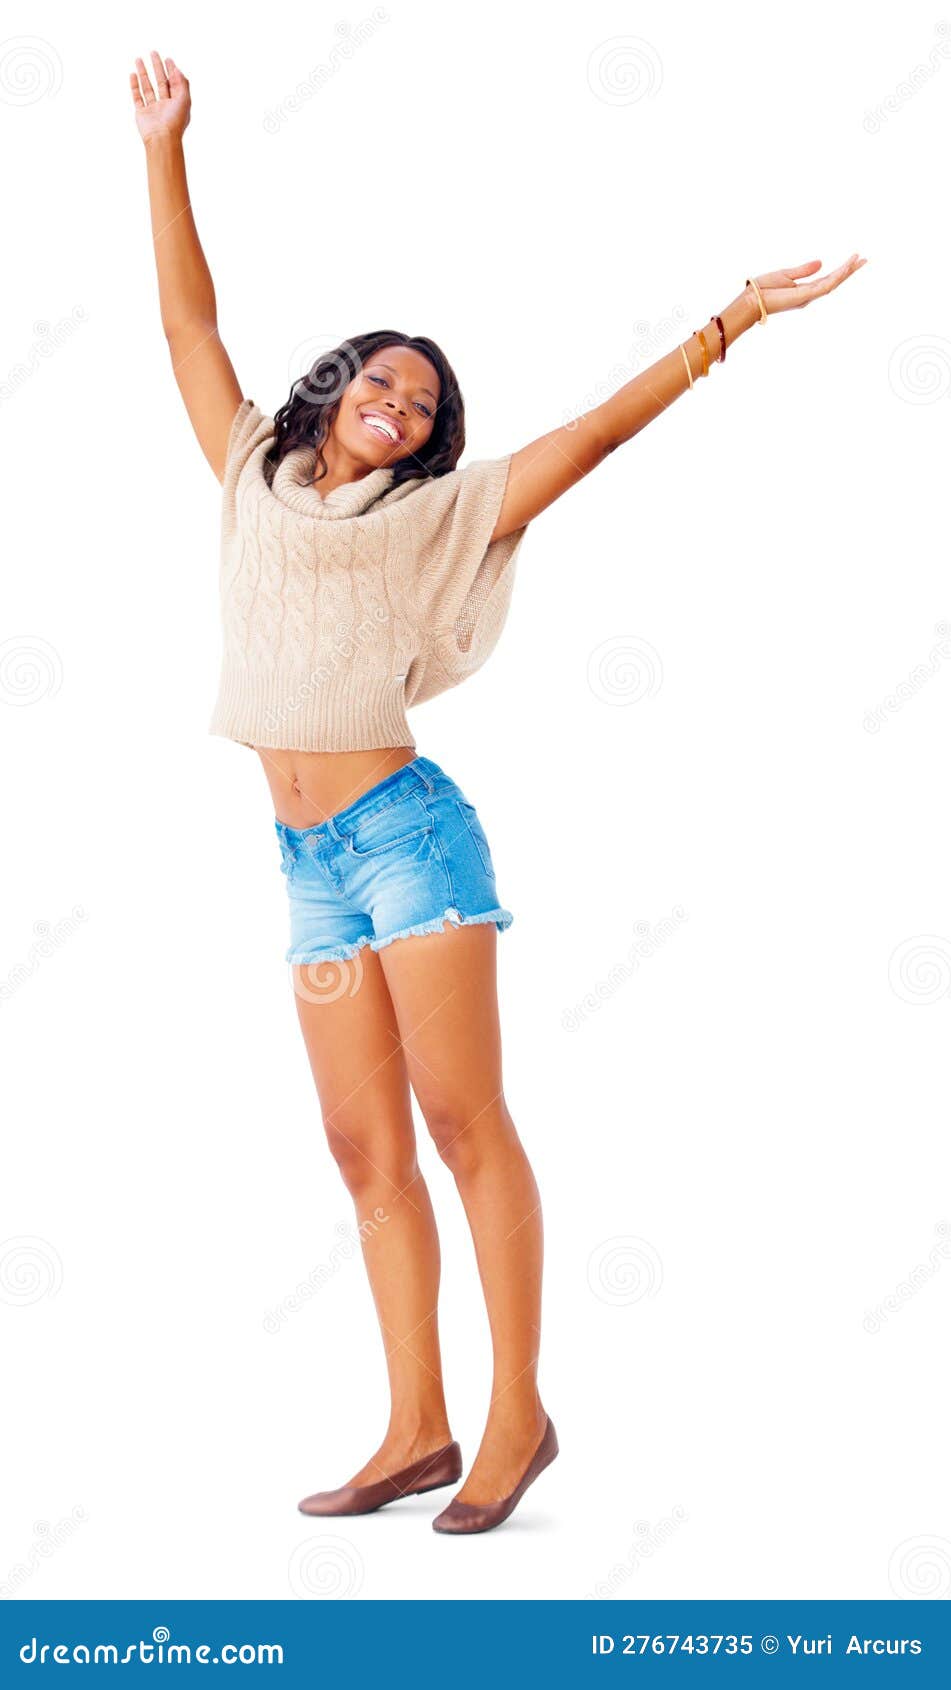 Stretching Out Her Arms. Happy Young Woman Standing Against a White  Background with Her Arms Outstretched. Stock Image - Image of freedom,  attractive: 276743735